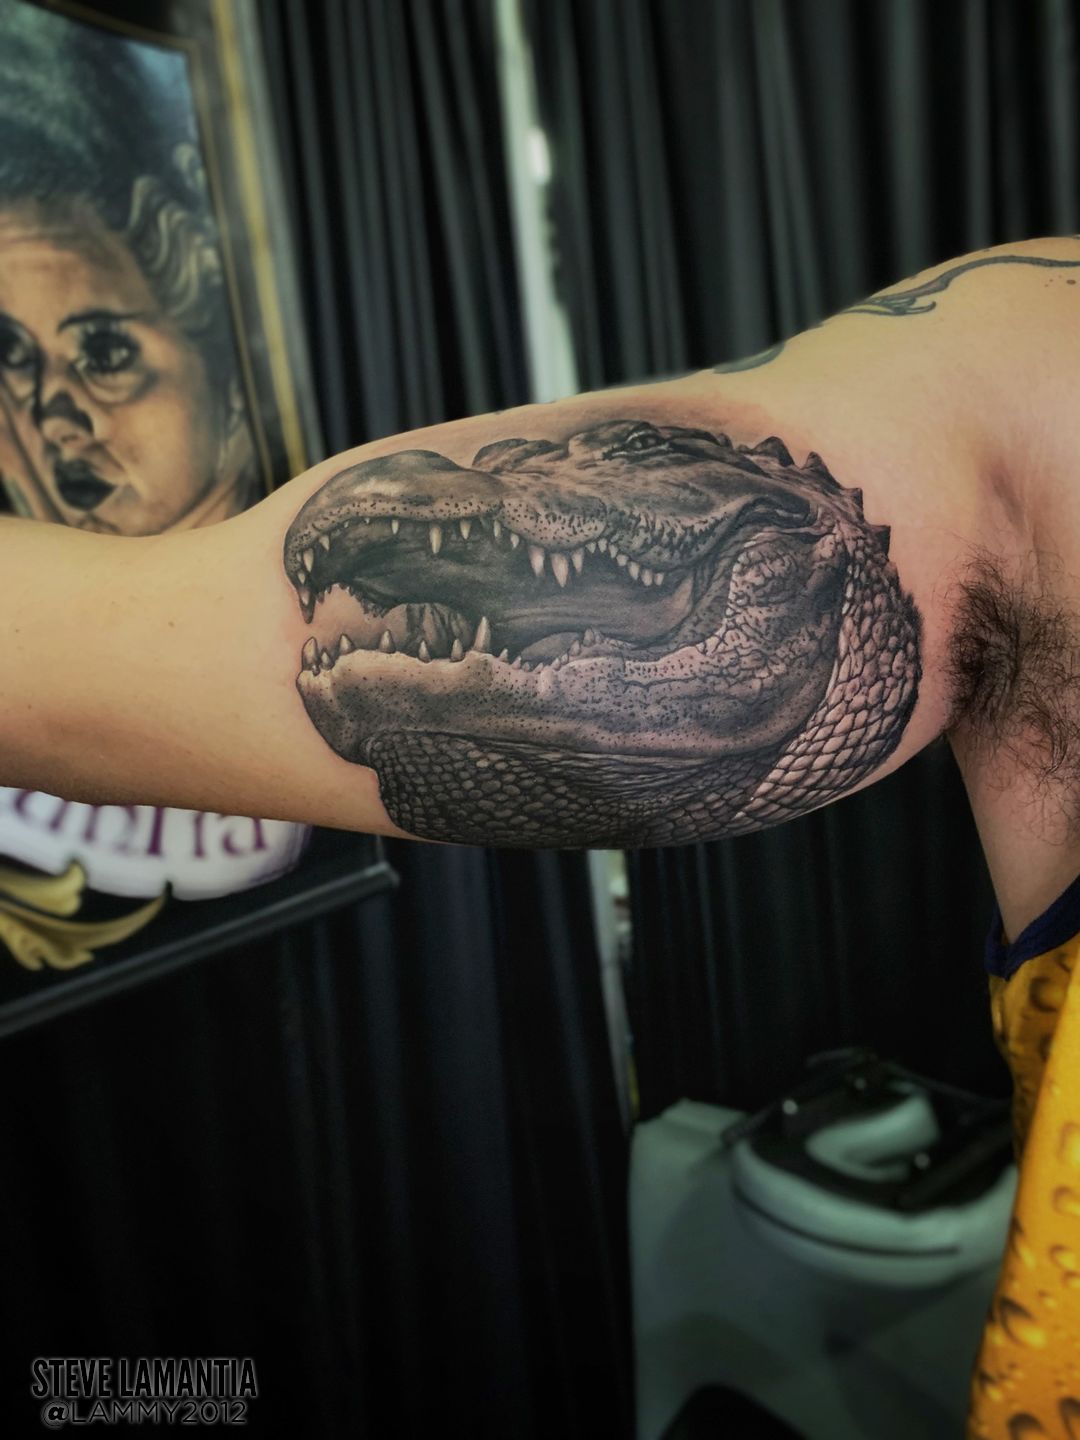 Alligator tattoo meanings  popular questions